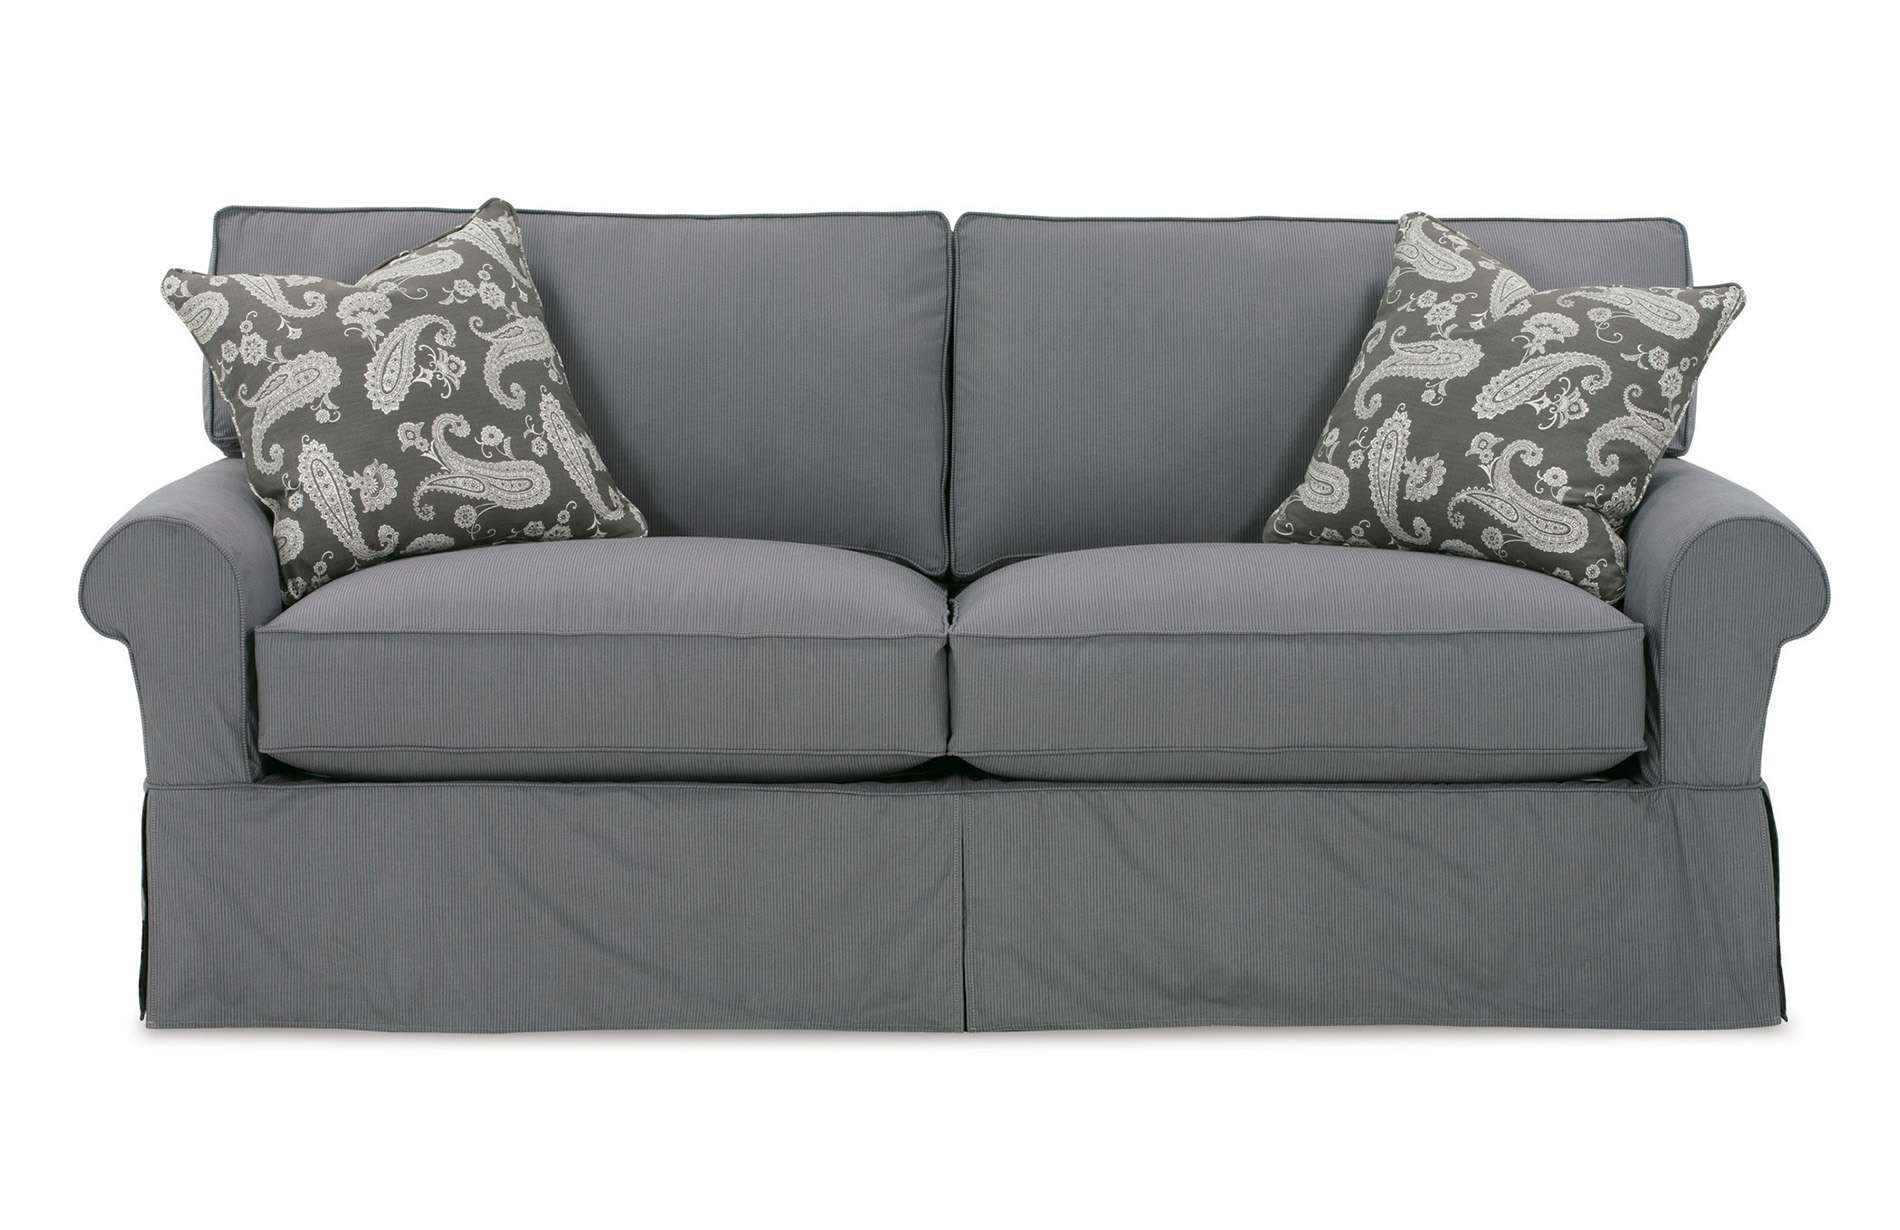 slipcovers for queen sofa bed